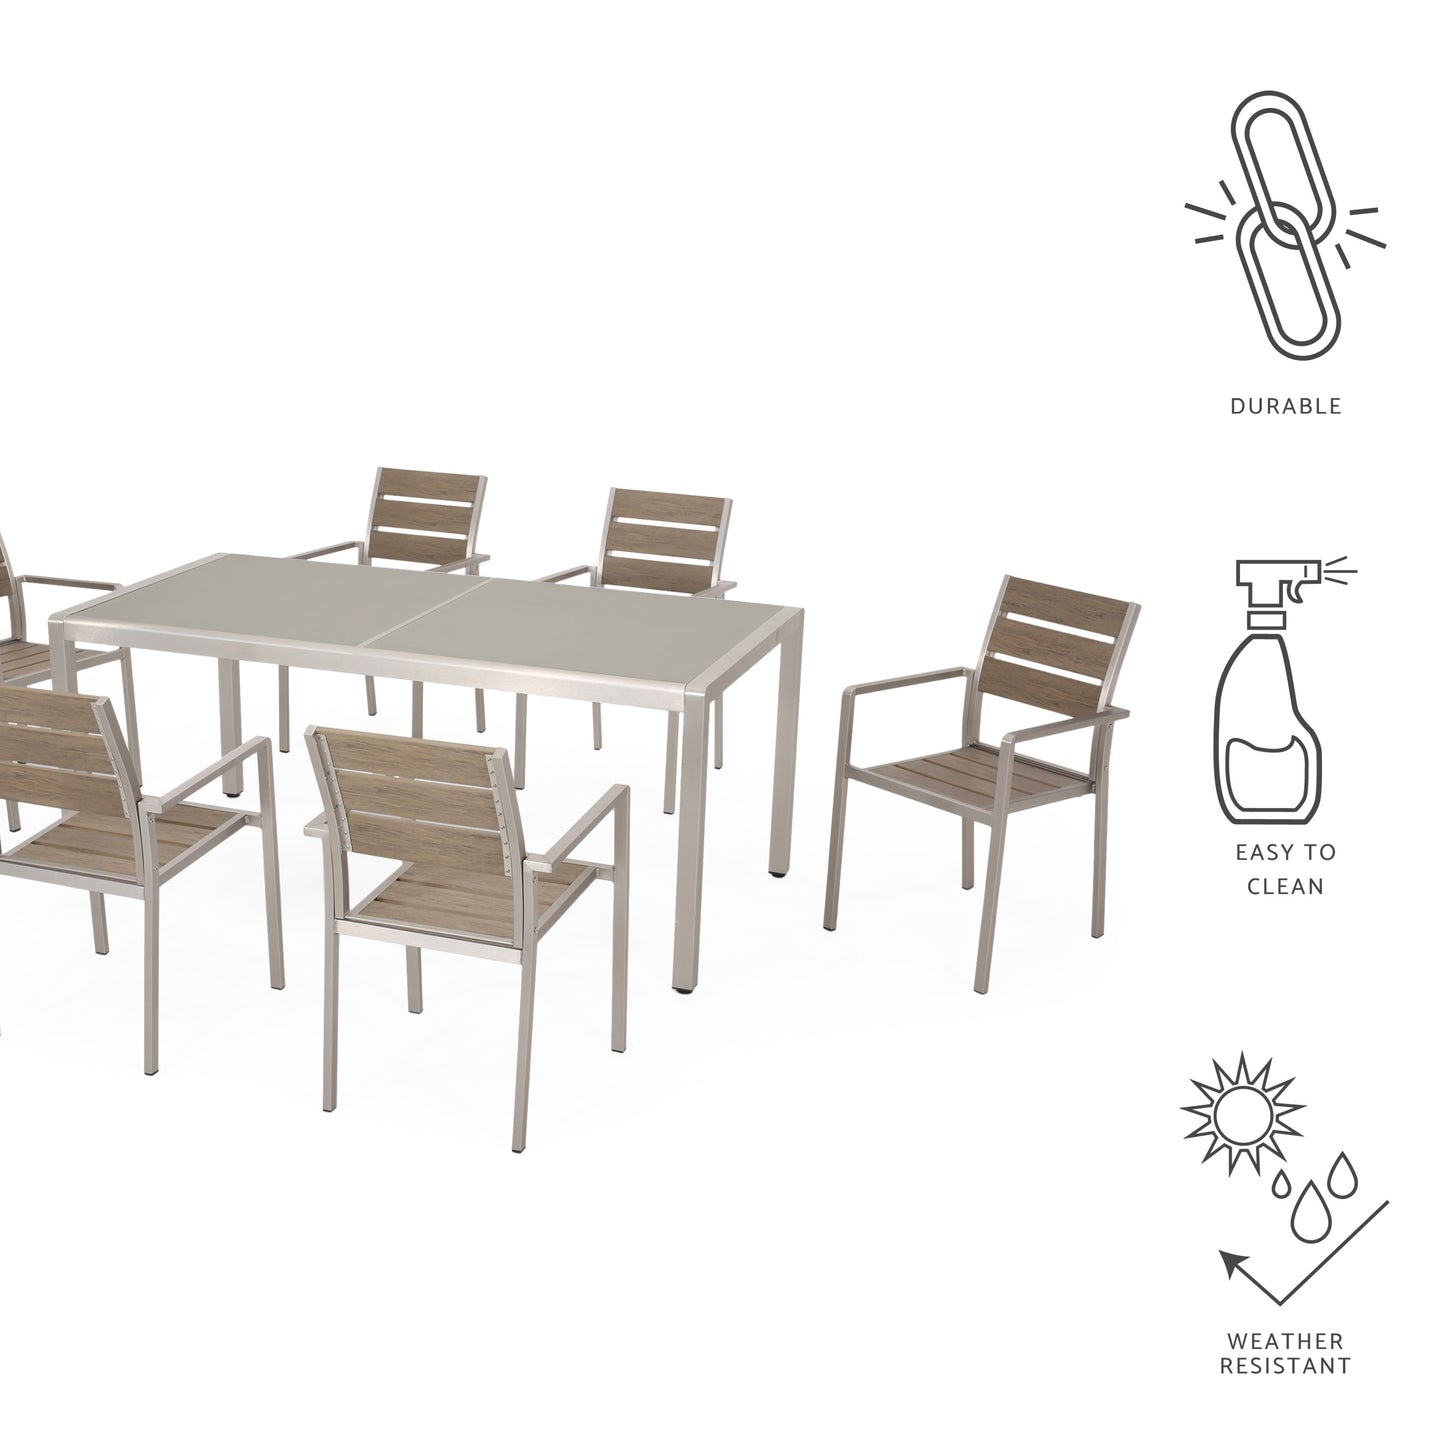 Cherie Outdoor Modern 6 Seater Aluminum Dining Set with Tempered Glass Table Top